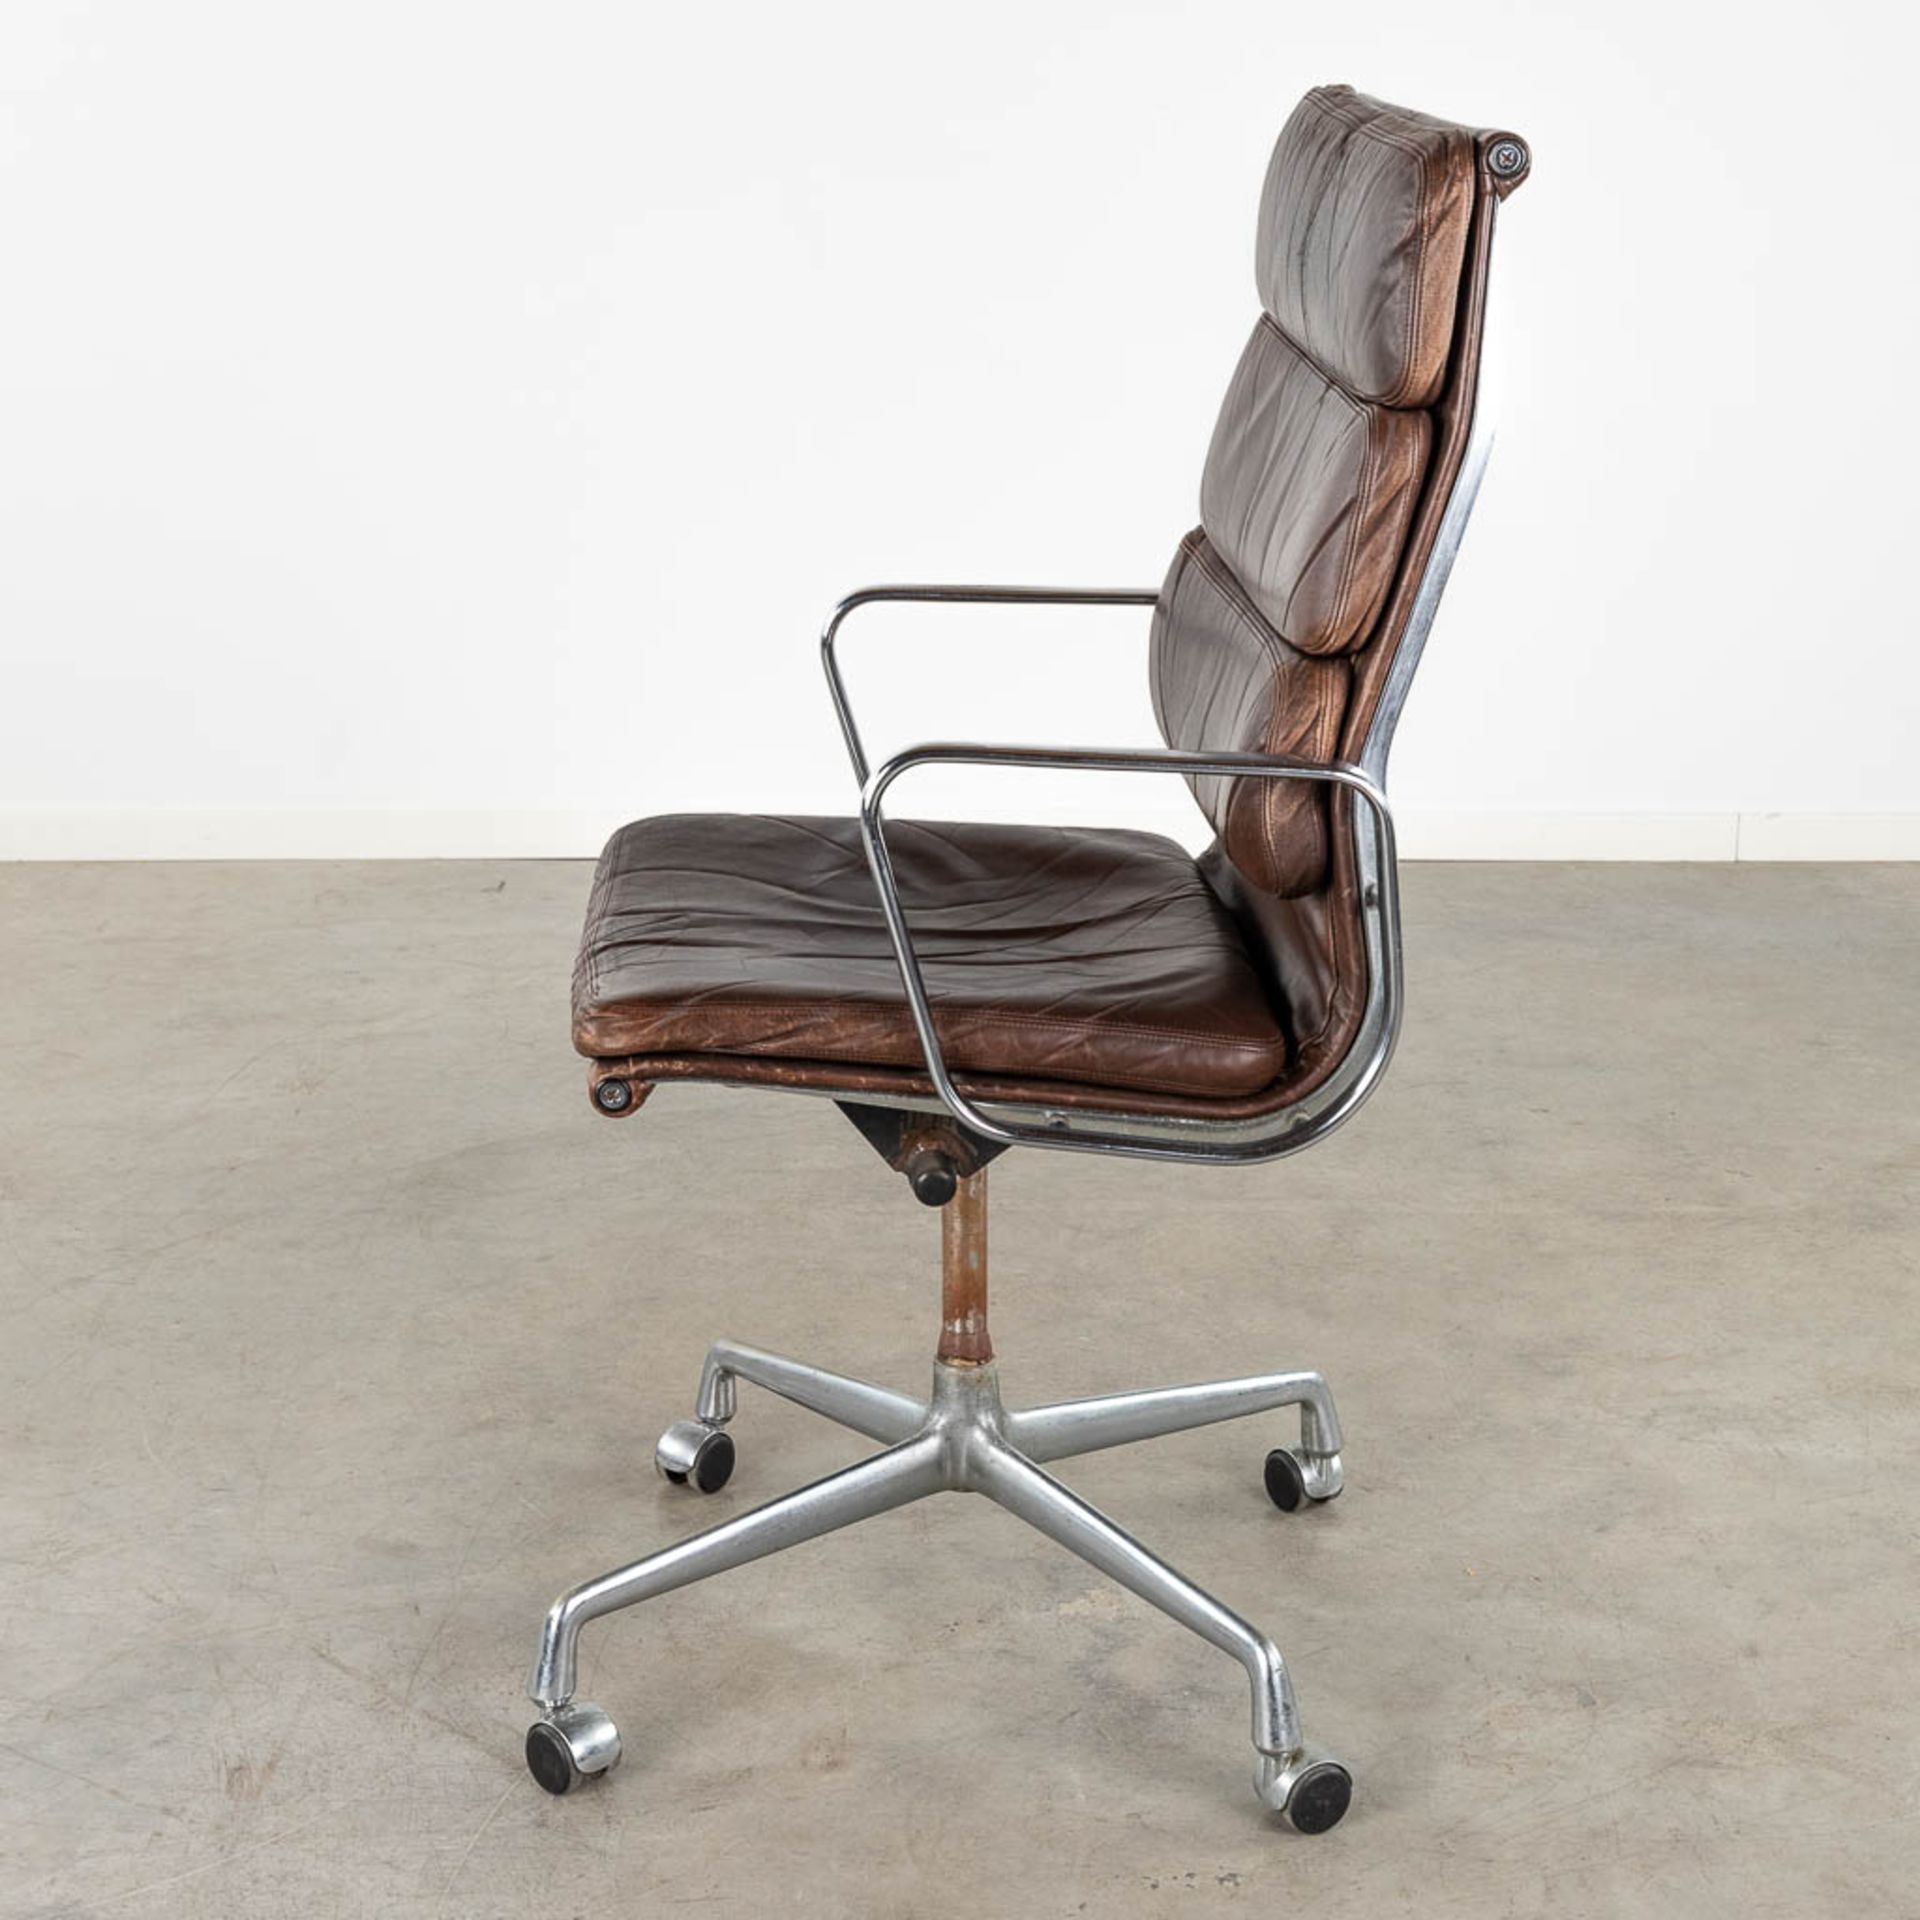 Charles &amp; Ray EAMES (XX-XXI) 'Soft Pad Office Chair' for Herman Miller. (D:111 x W:59 x H:63 cm) - Image 4 of 12